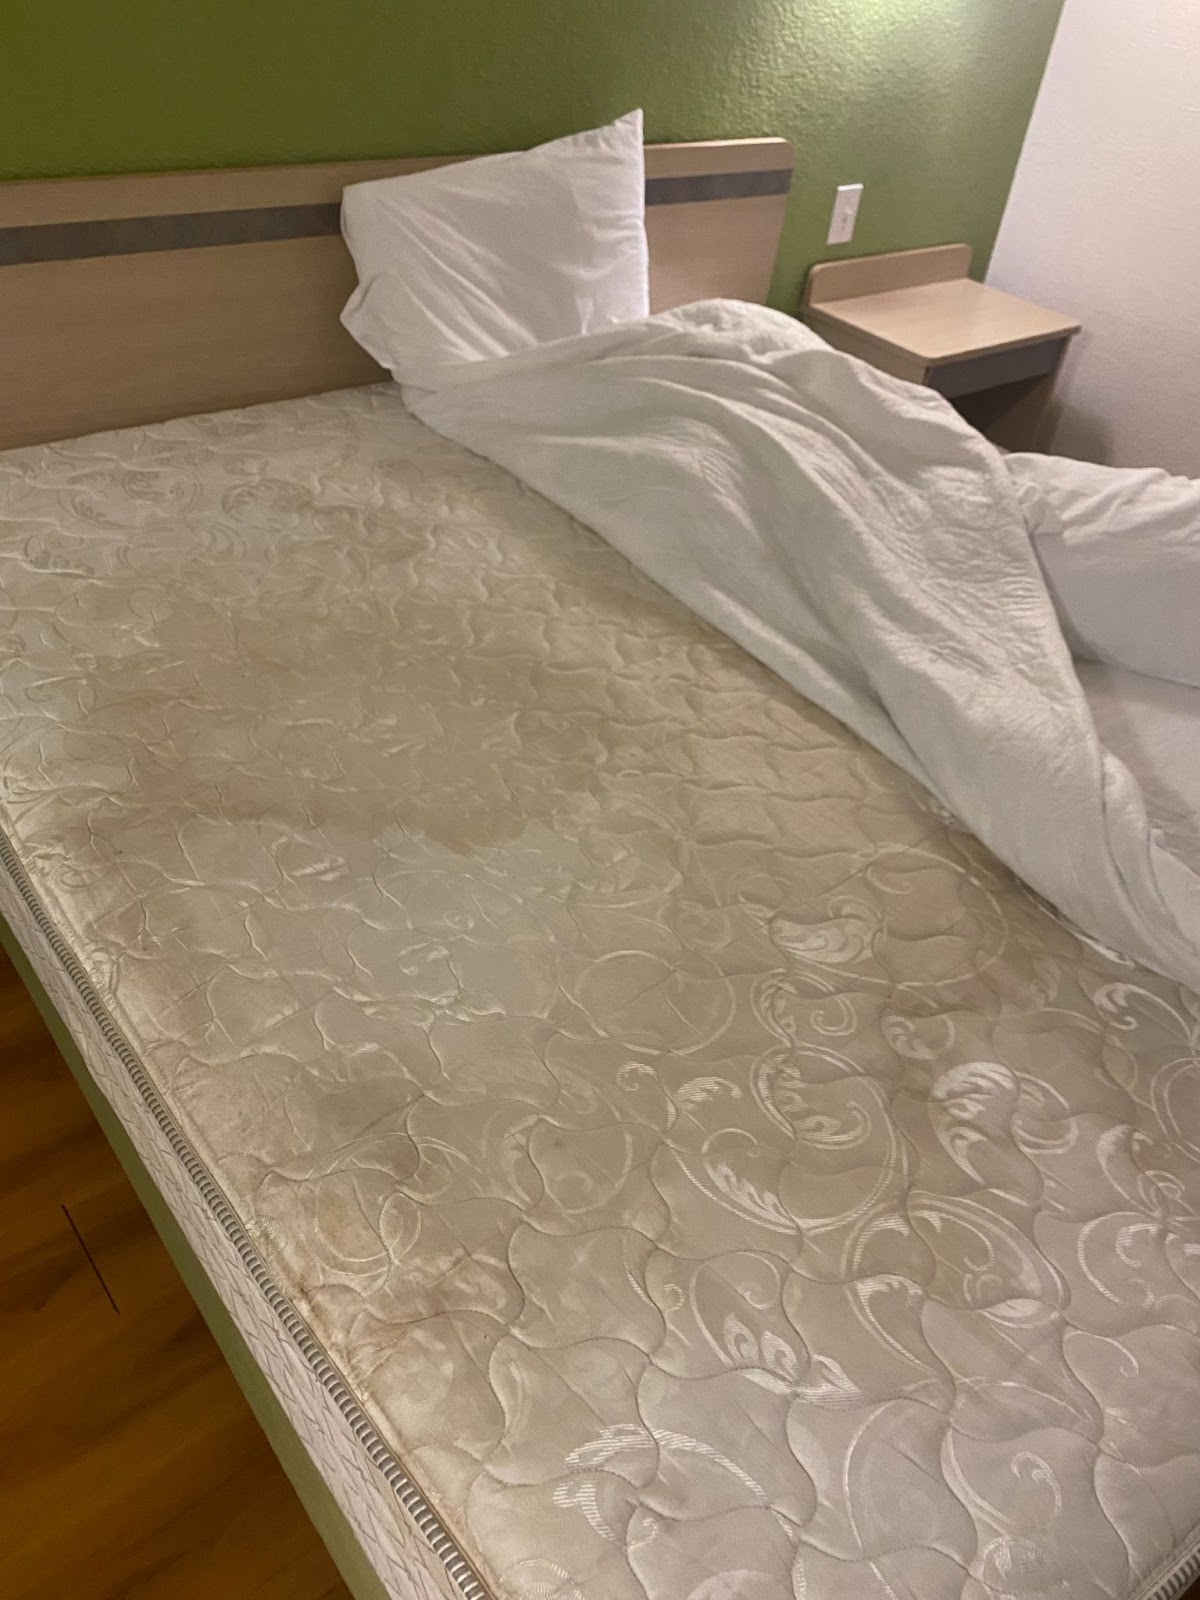 Dirty and stained mattress